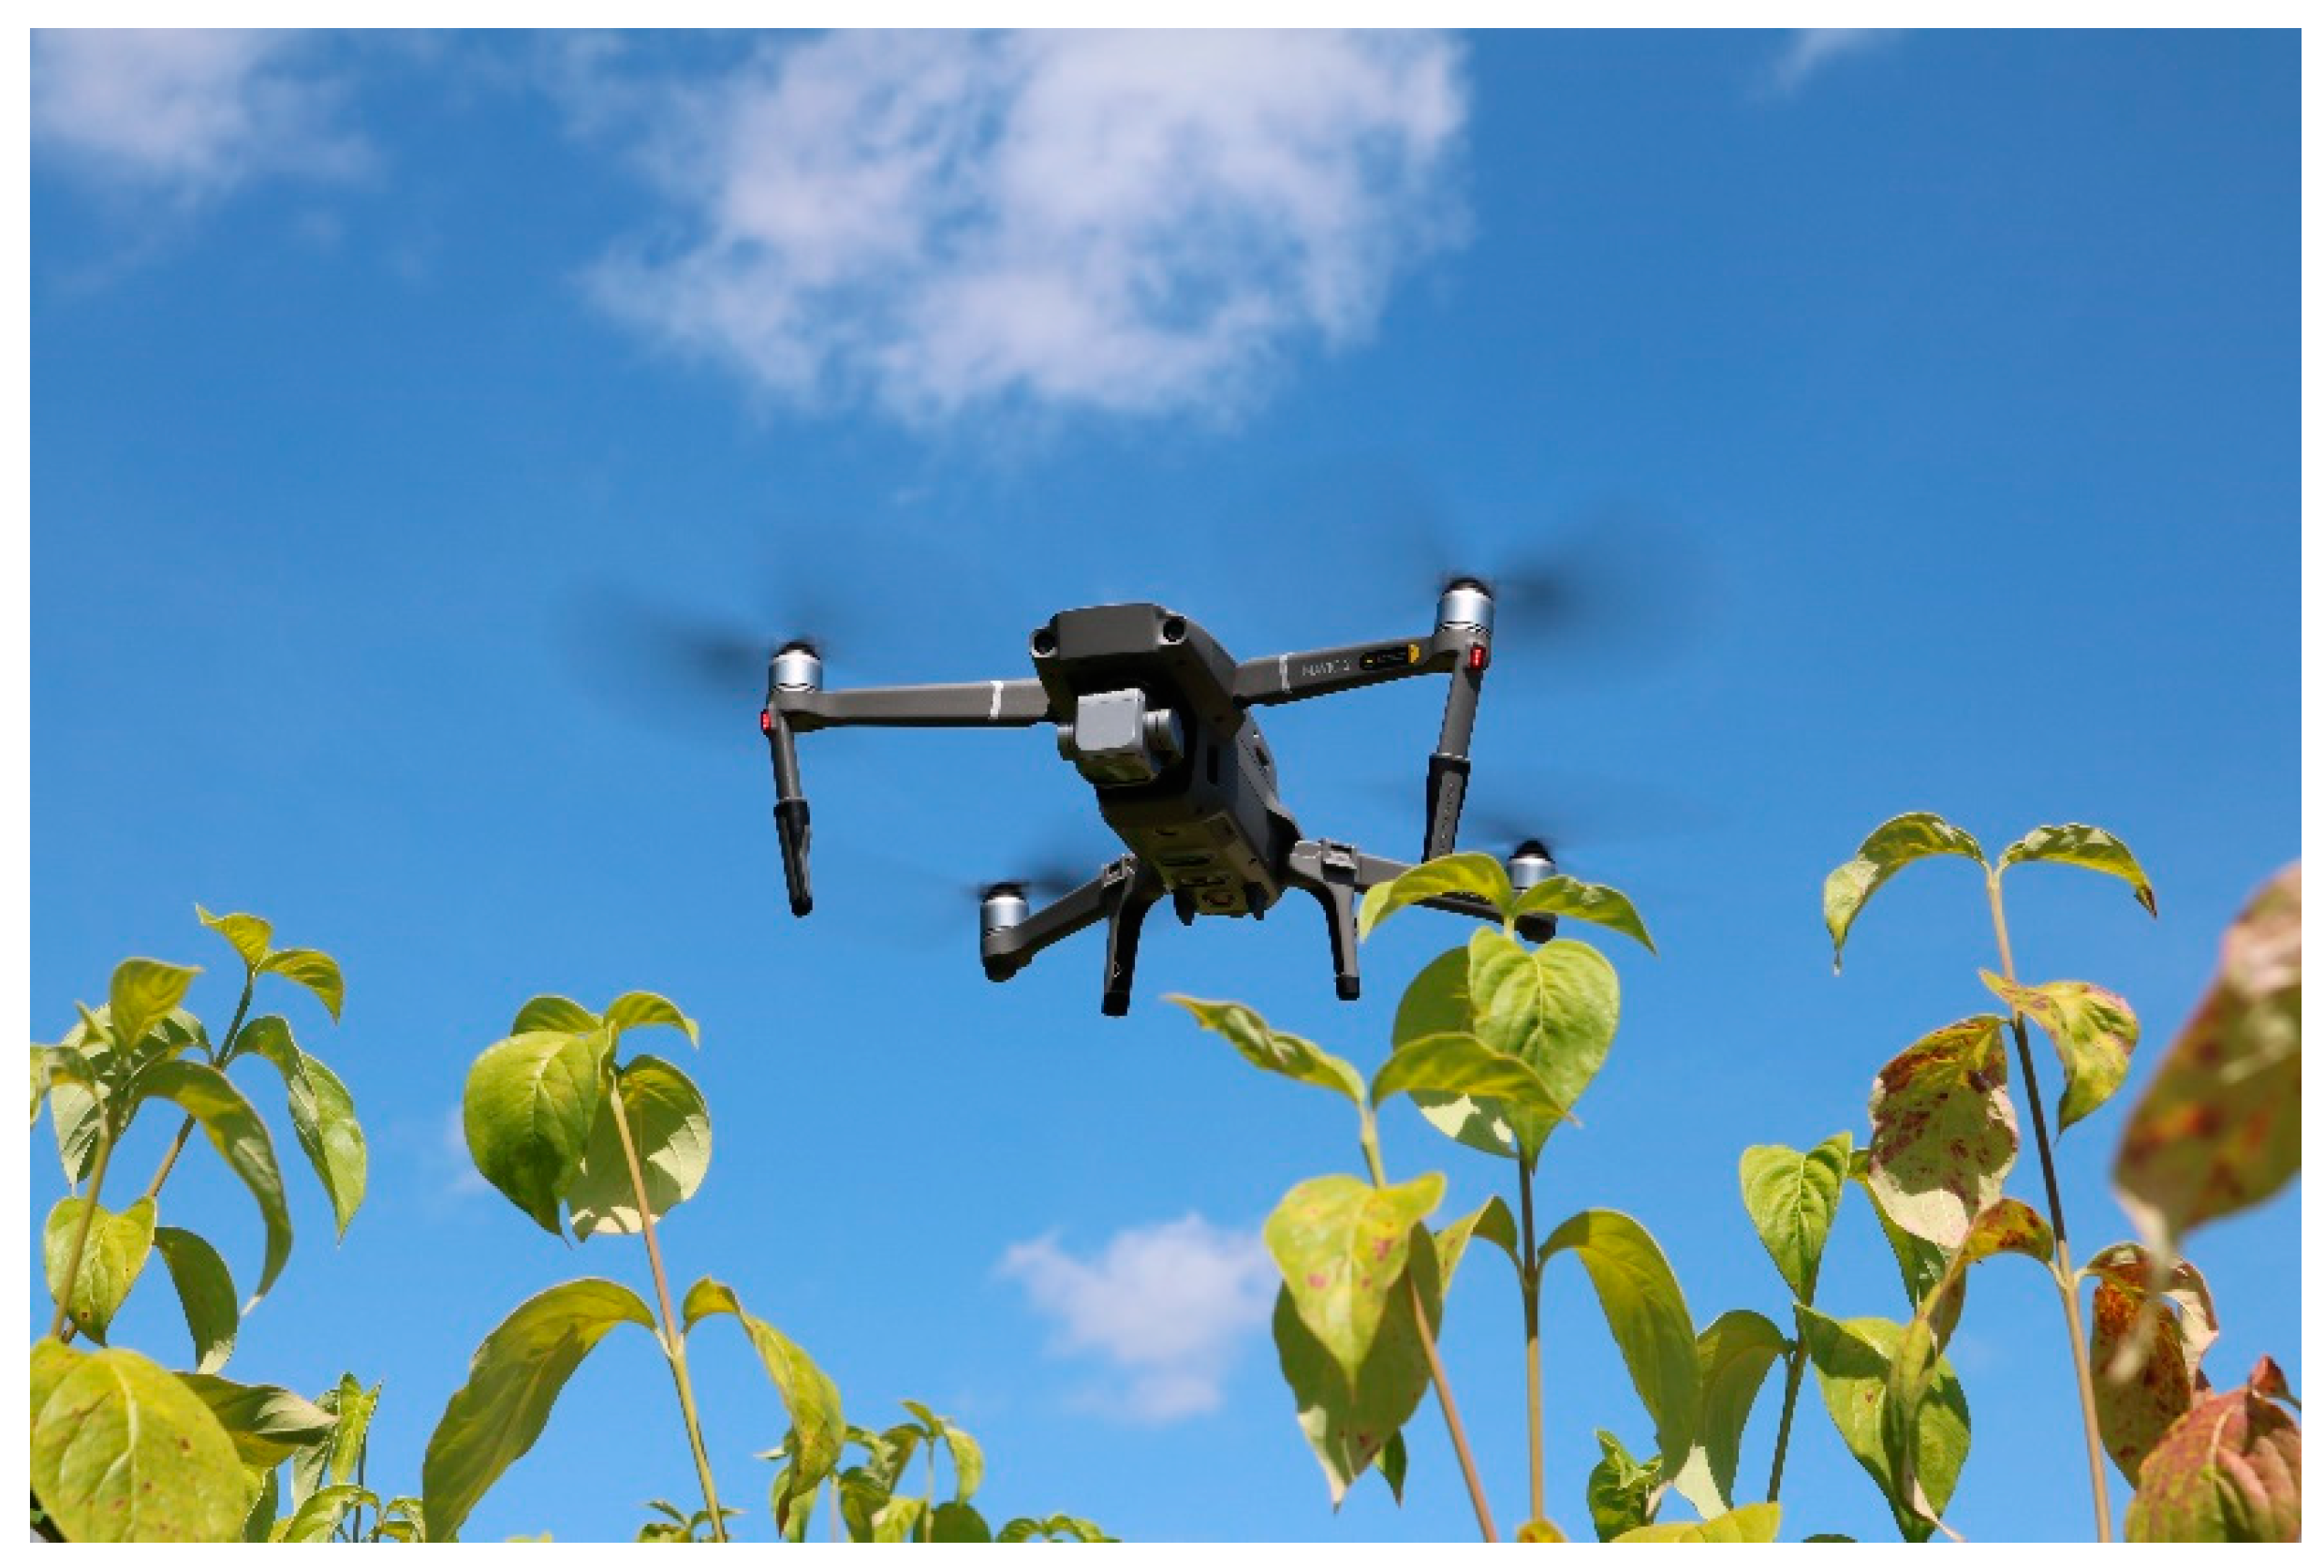 Agronomy | Free Full-Text | Unmanned Aircraft System (UAS) Technology and  Applications in Agriculture